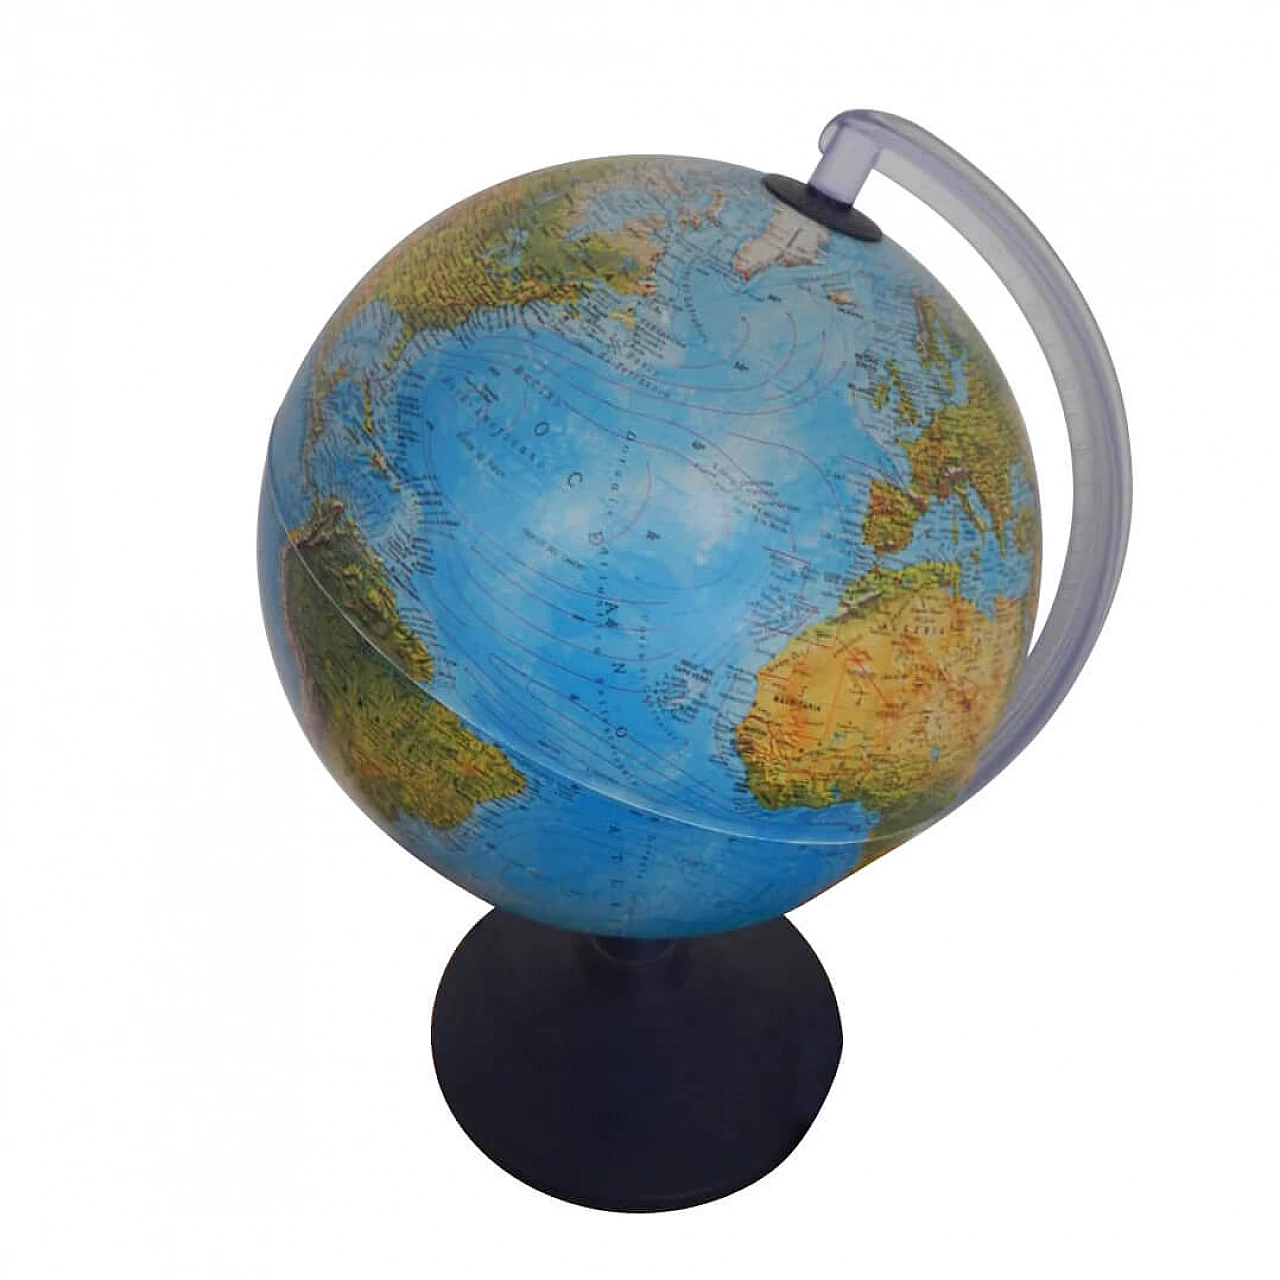 Rifoli globe with light, made in Italy, 90s 1180686